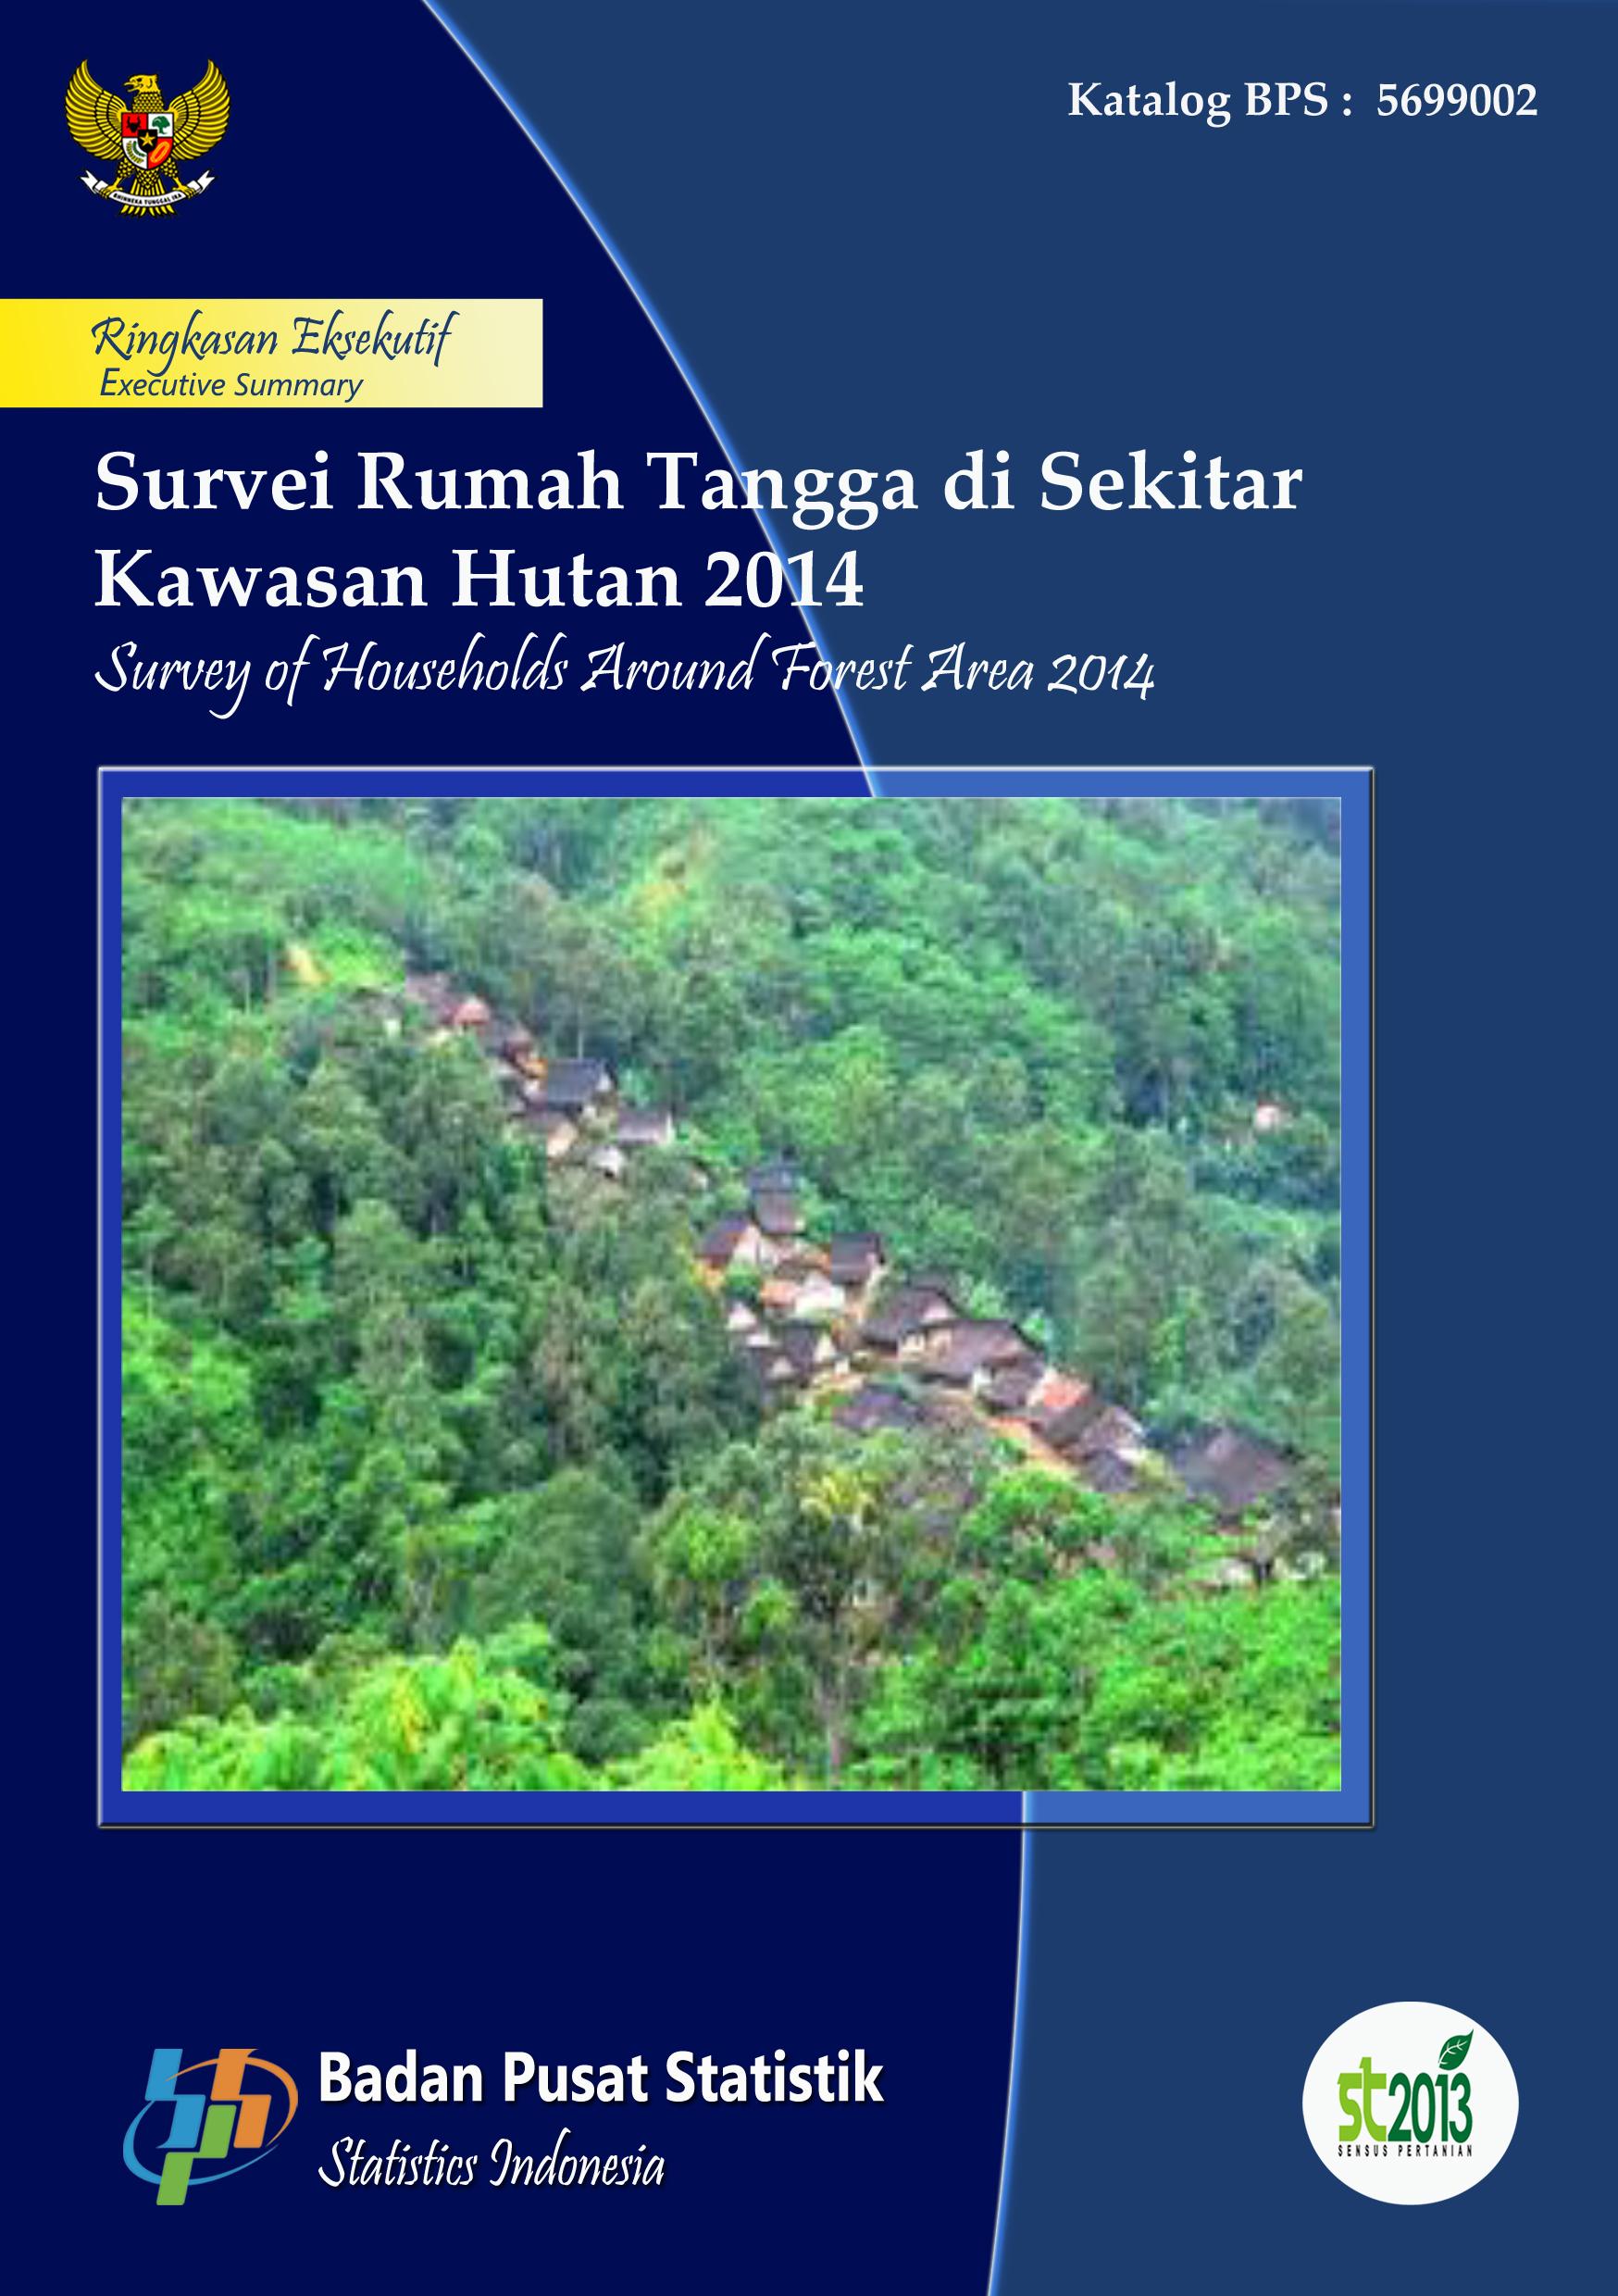 Executive Summary of Survey of Households Around Forest Area 2014